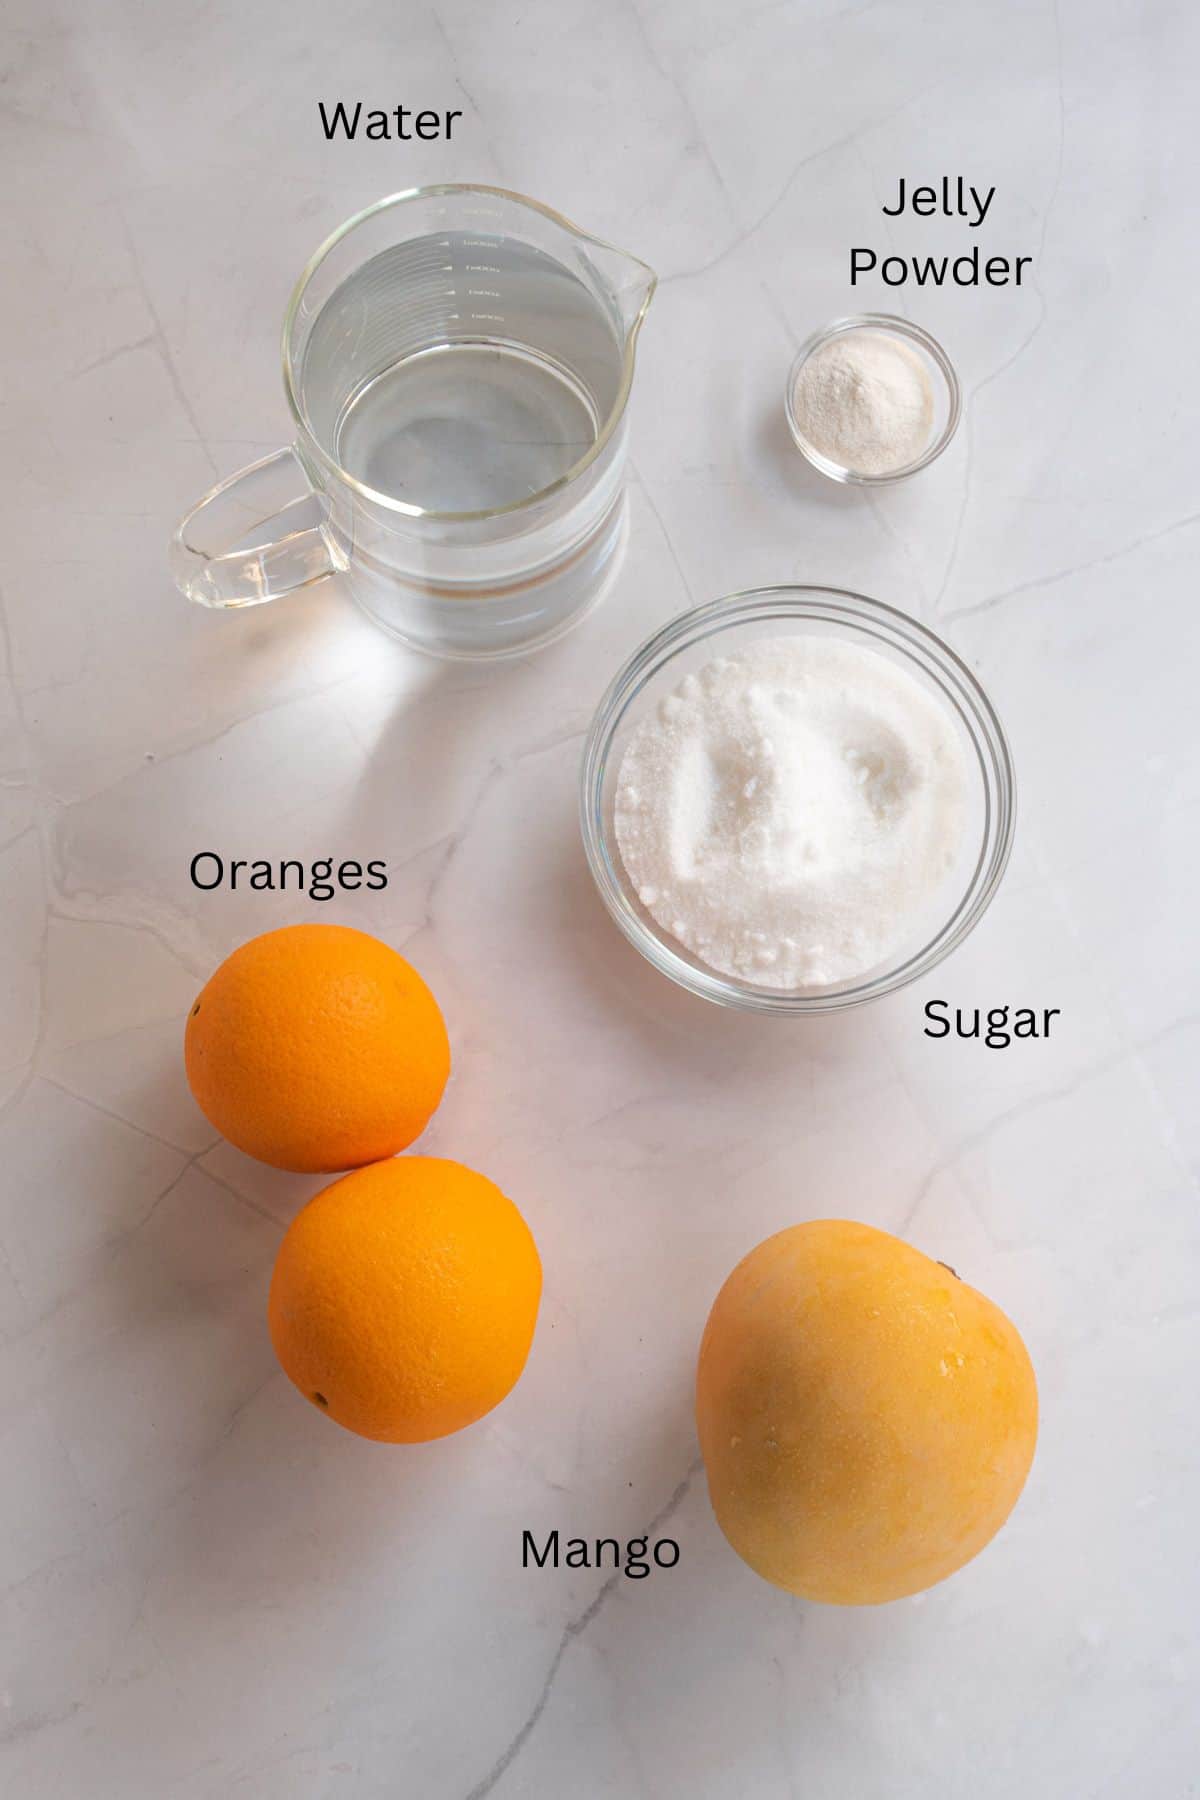 Water, jelly powder, sugar, oranges and mango against a marble background.